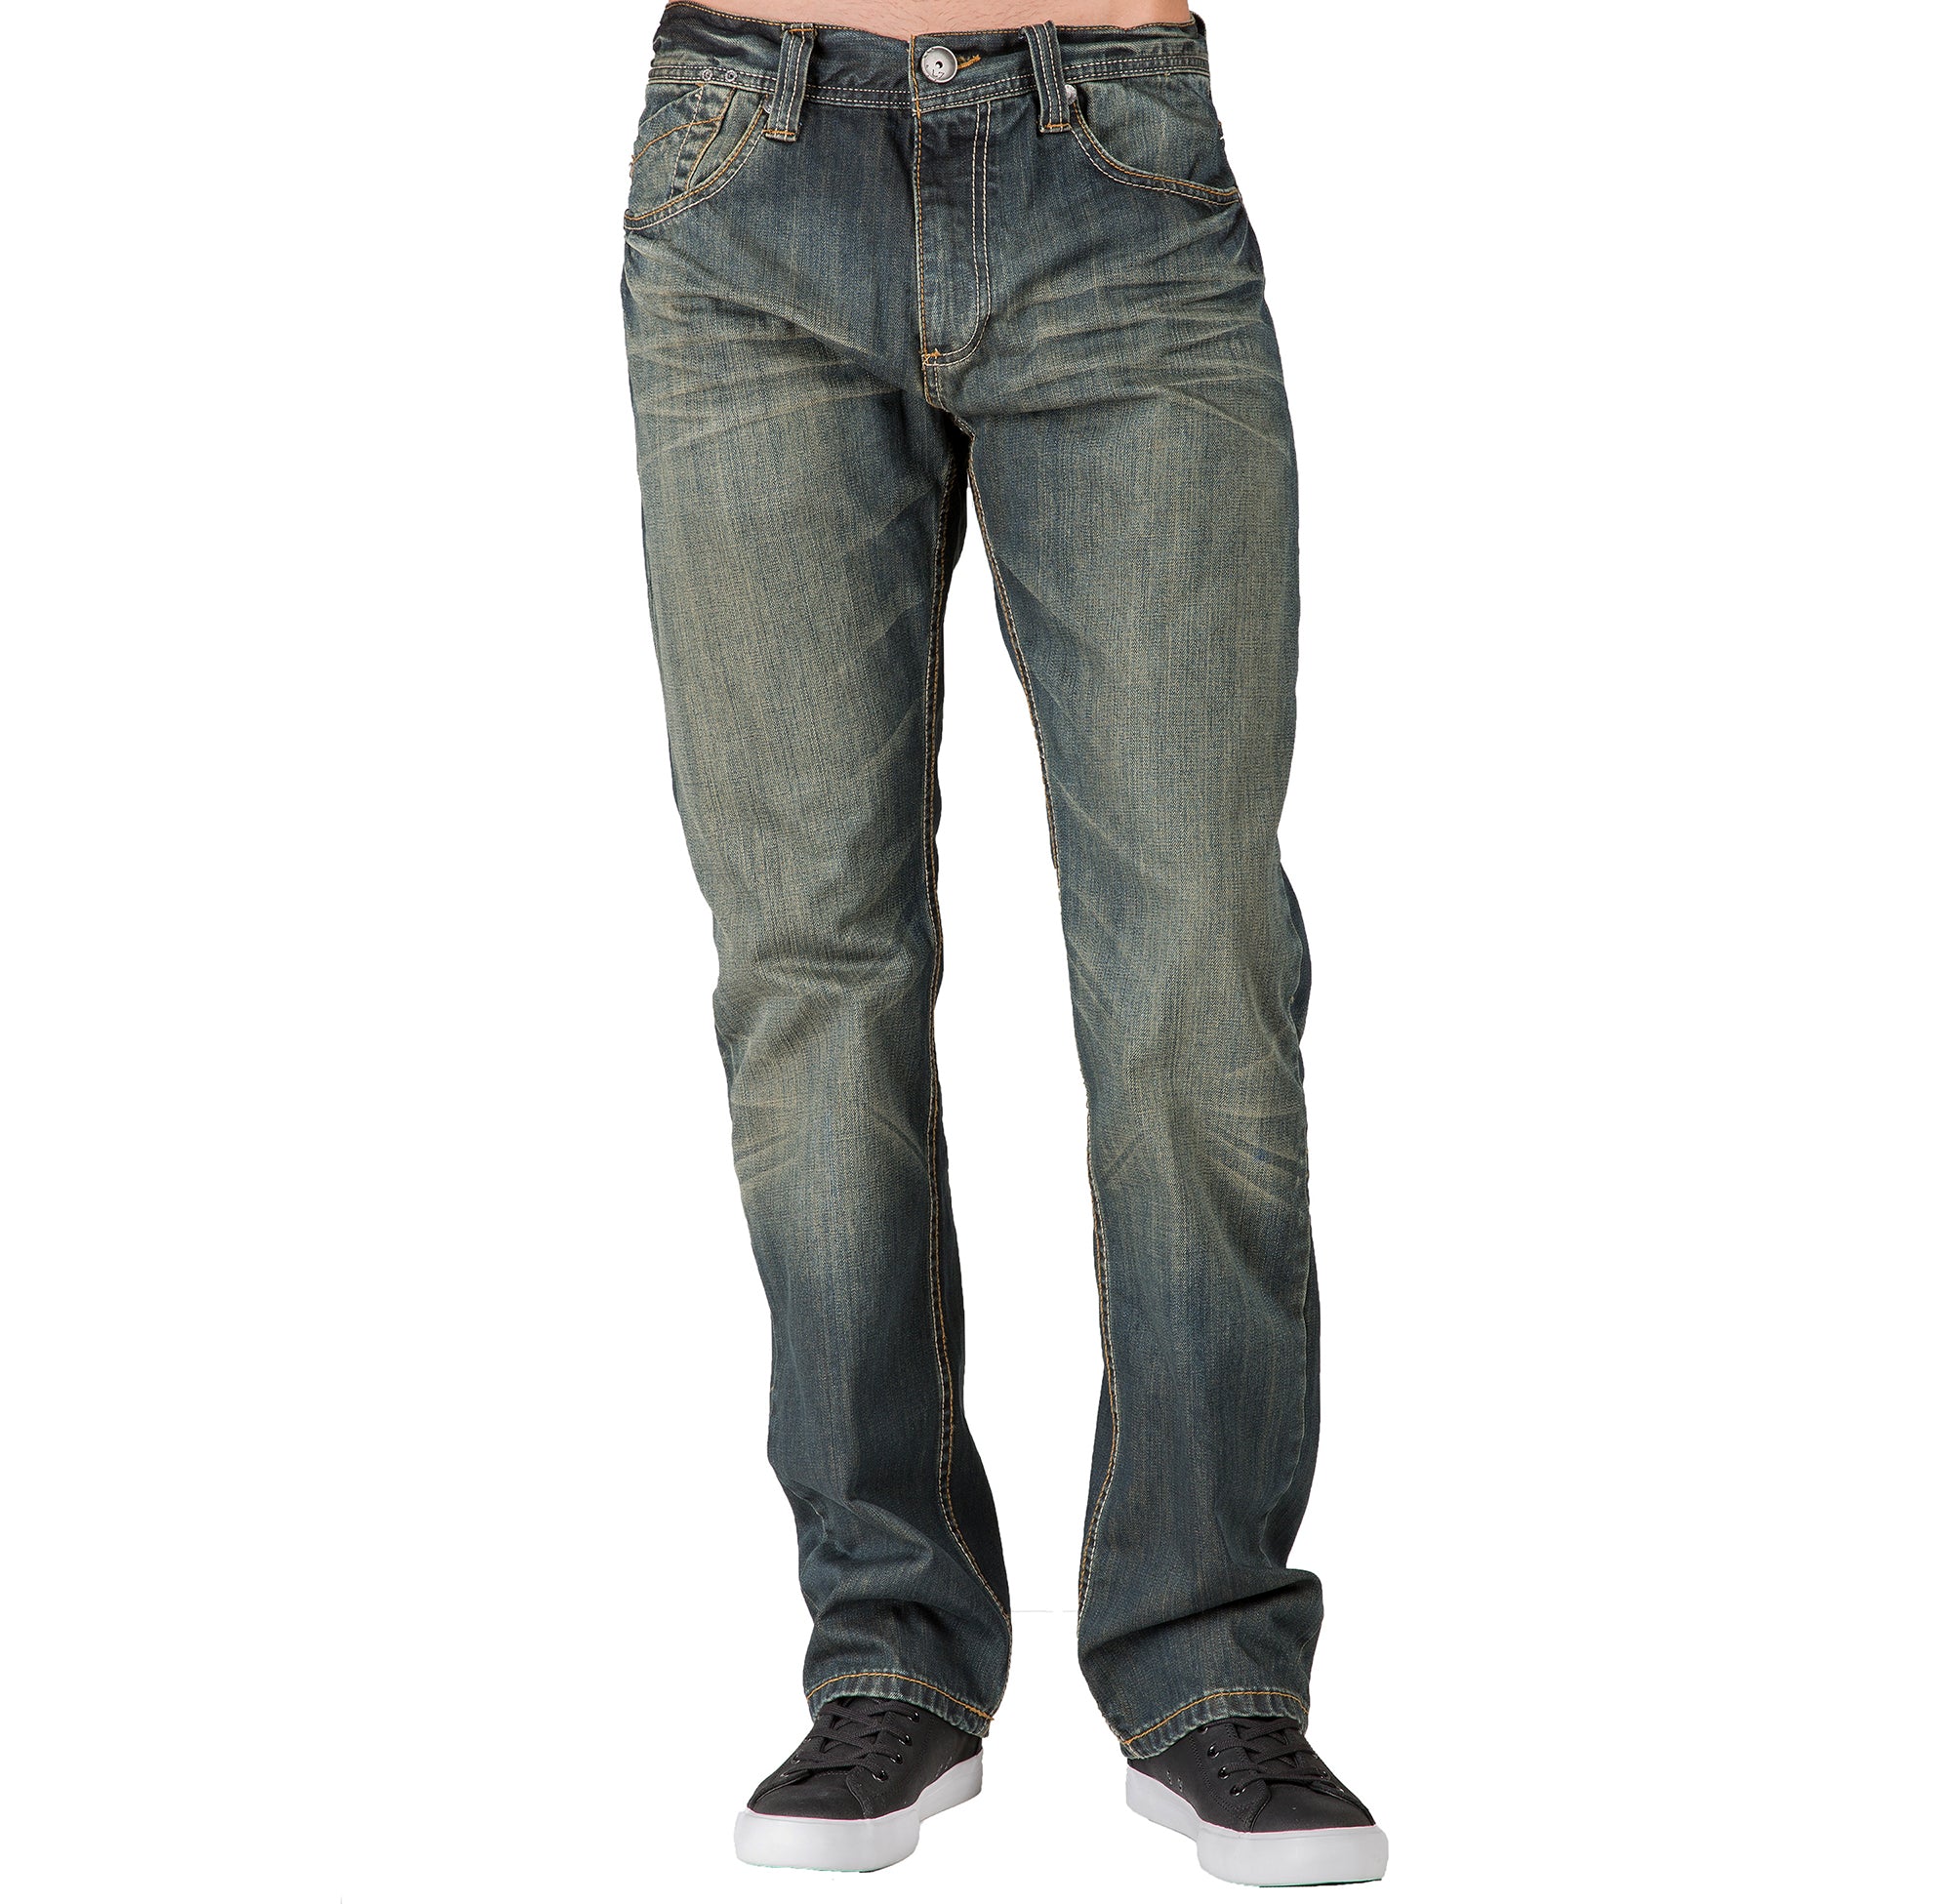 Relaxed Straight Faded Rustic Tinting Premium Denim Signature 5 Pocket Jeans Hand Rub